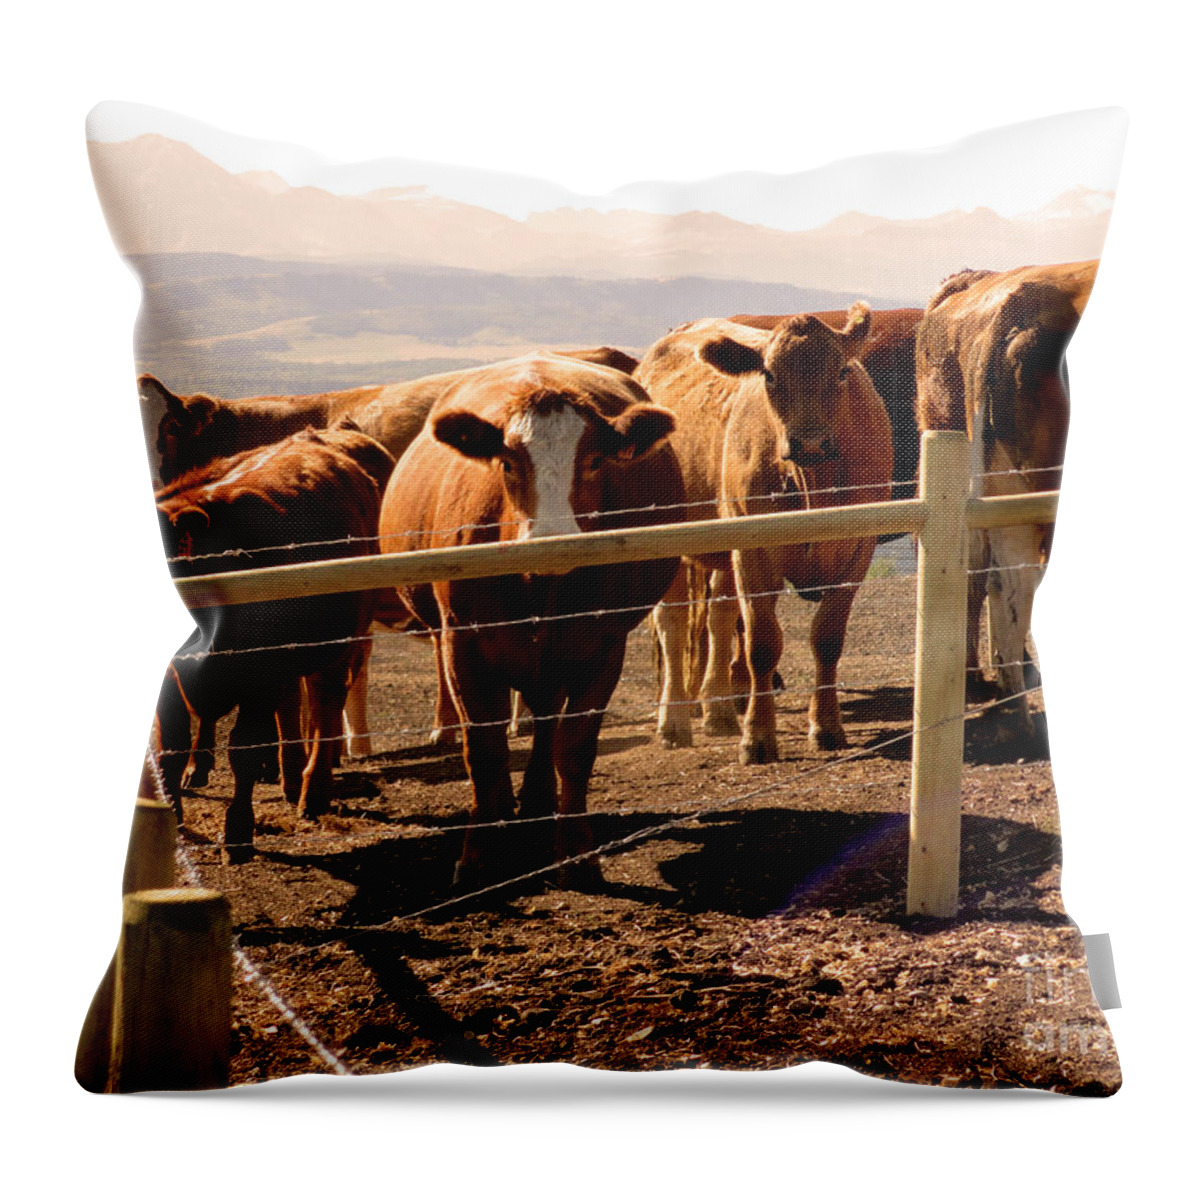 Al Bourassa Throw Pillow featuring the photograph Rockies Cattle Country by Al Bourassa